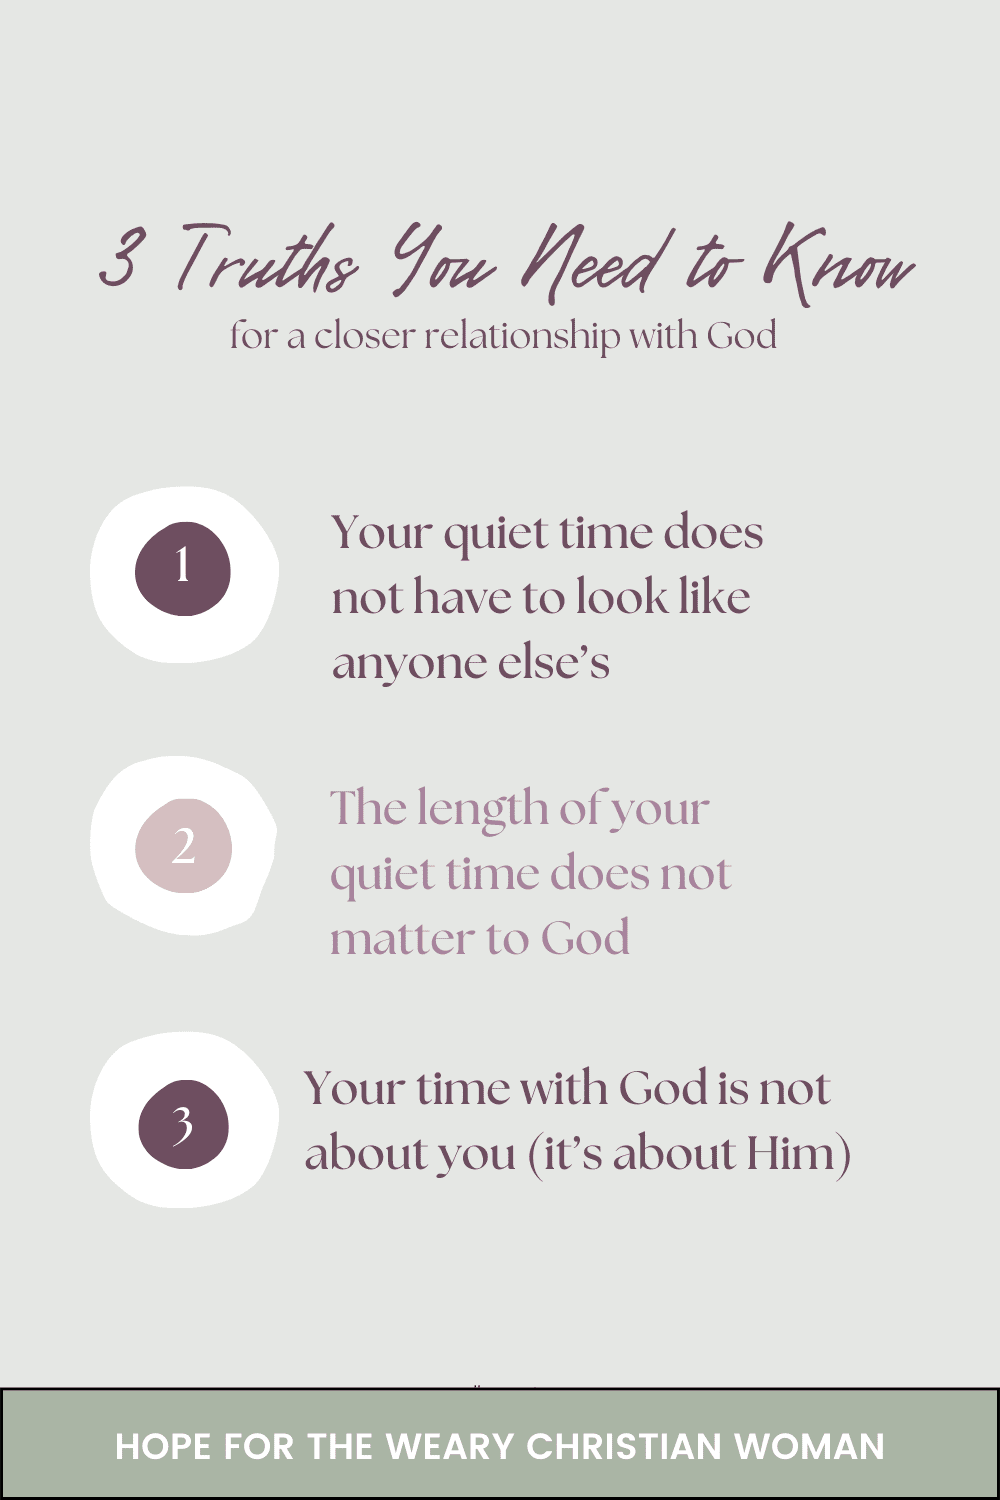 Are you ready to grow closer to God through consistent quiet time? Learn the three truths you need to know if you truly want to grow your faith and deepen your relationship with God.